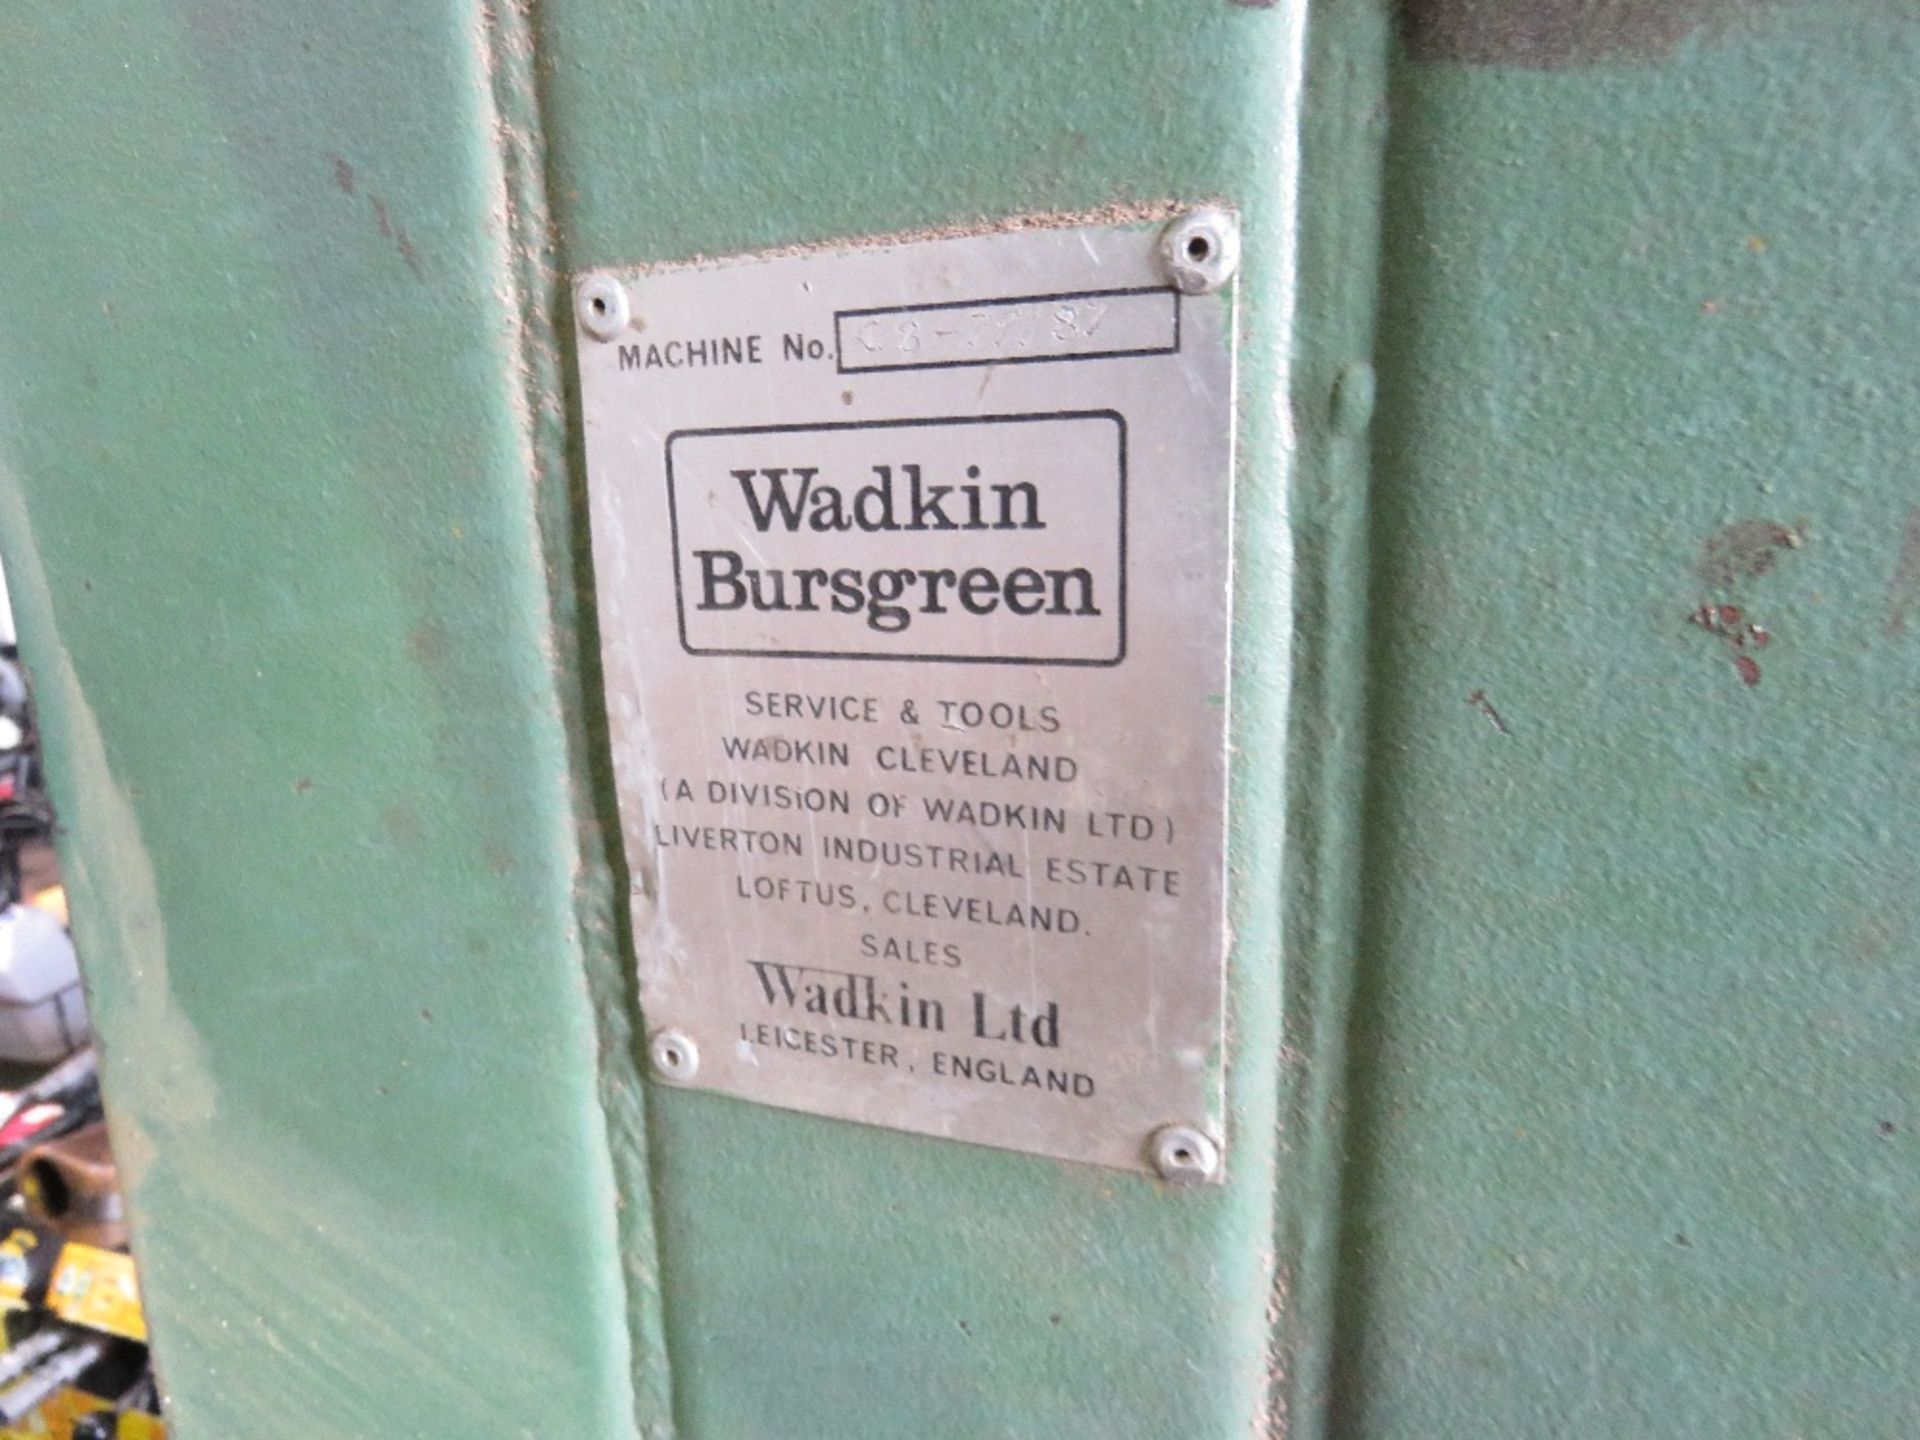 LARGE SIZED 3 PHASE WADKIN BANDSAW WITH SPARE BLADES. - Image 2 of 5